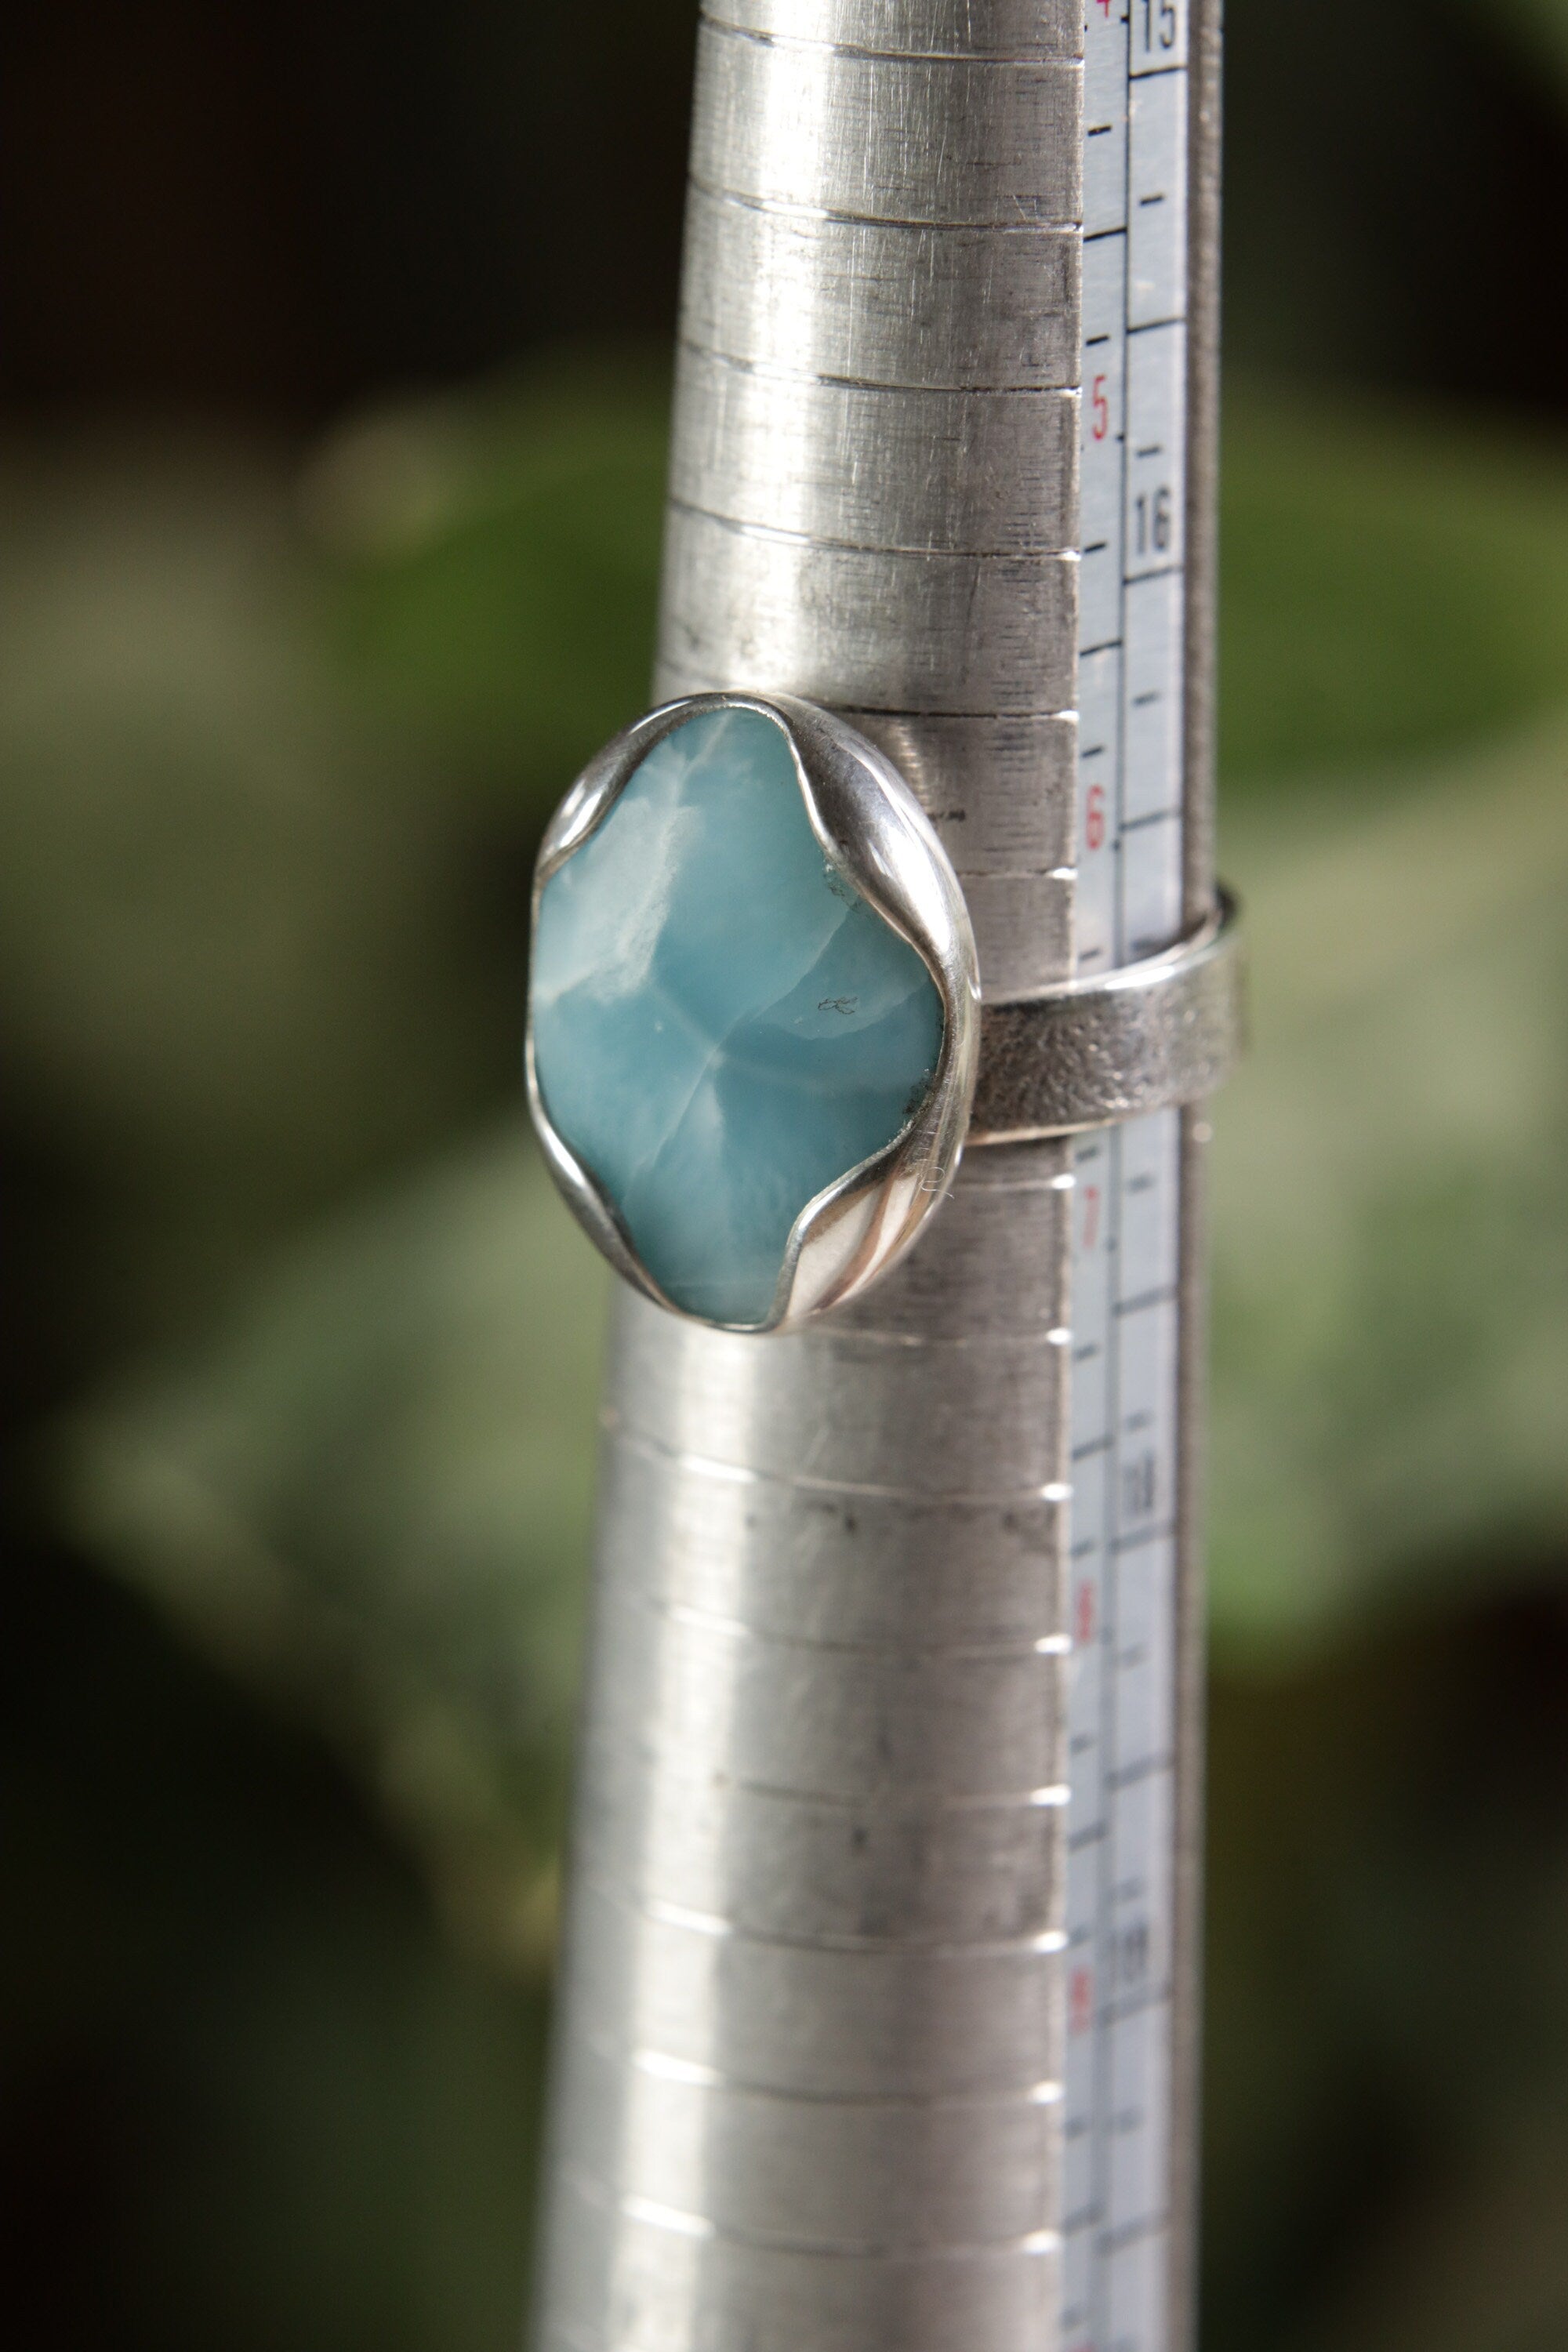 A Tribute to Oceanic Splendor: Adjustable Sterling Silver Ring with Oval Larimar - Unisex - Size 5-12 US - NO/07